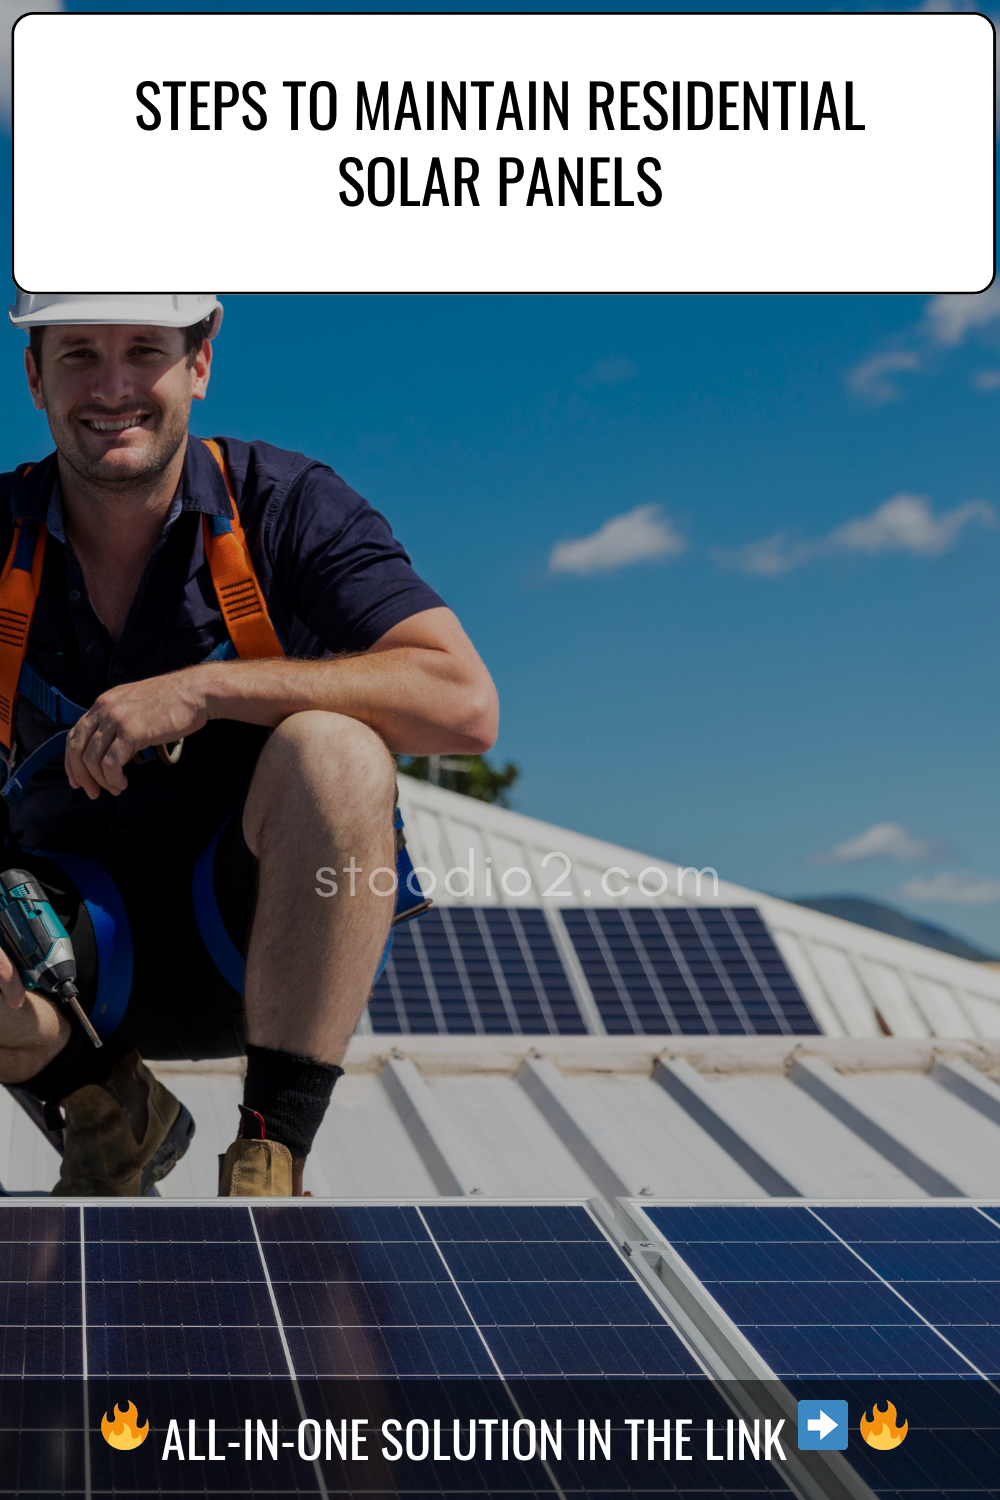 Steps to Maintain Residential Solar Panels